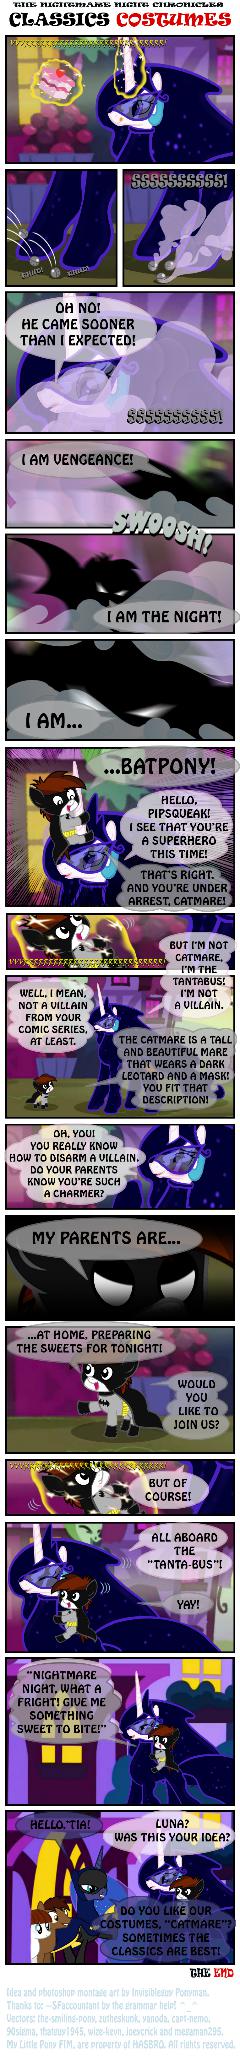 THE NIGHTMARE NIGHT CHRONICLES - CLASSIC COSTUMES